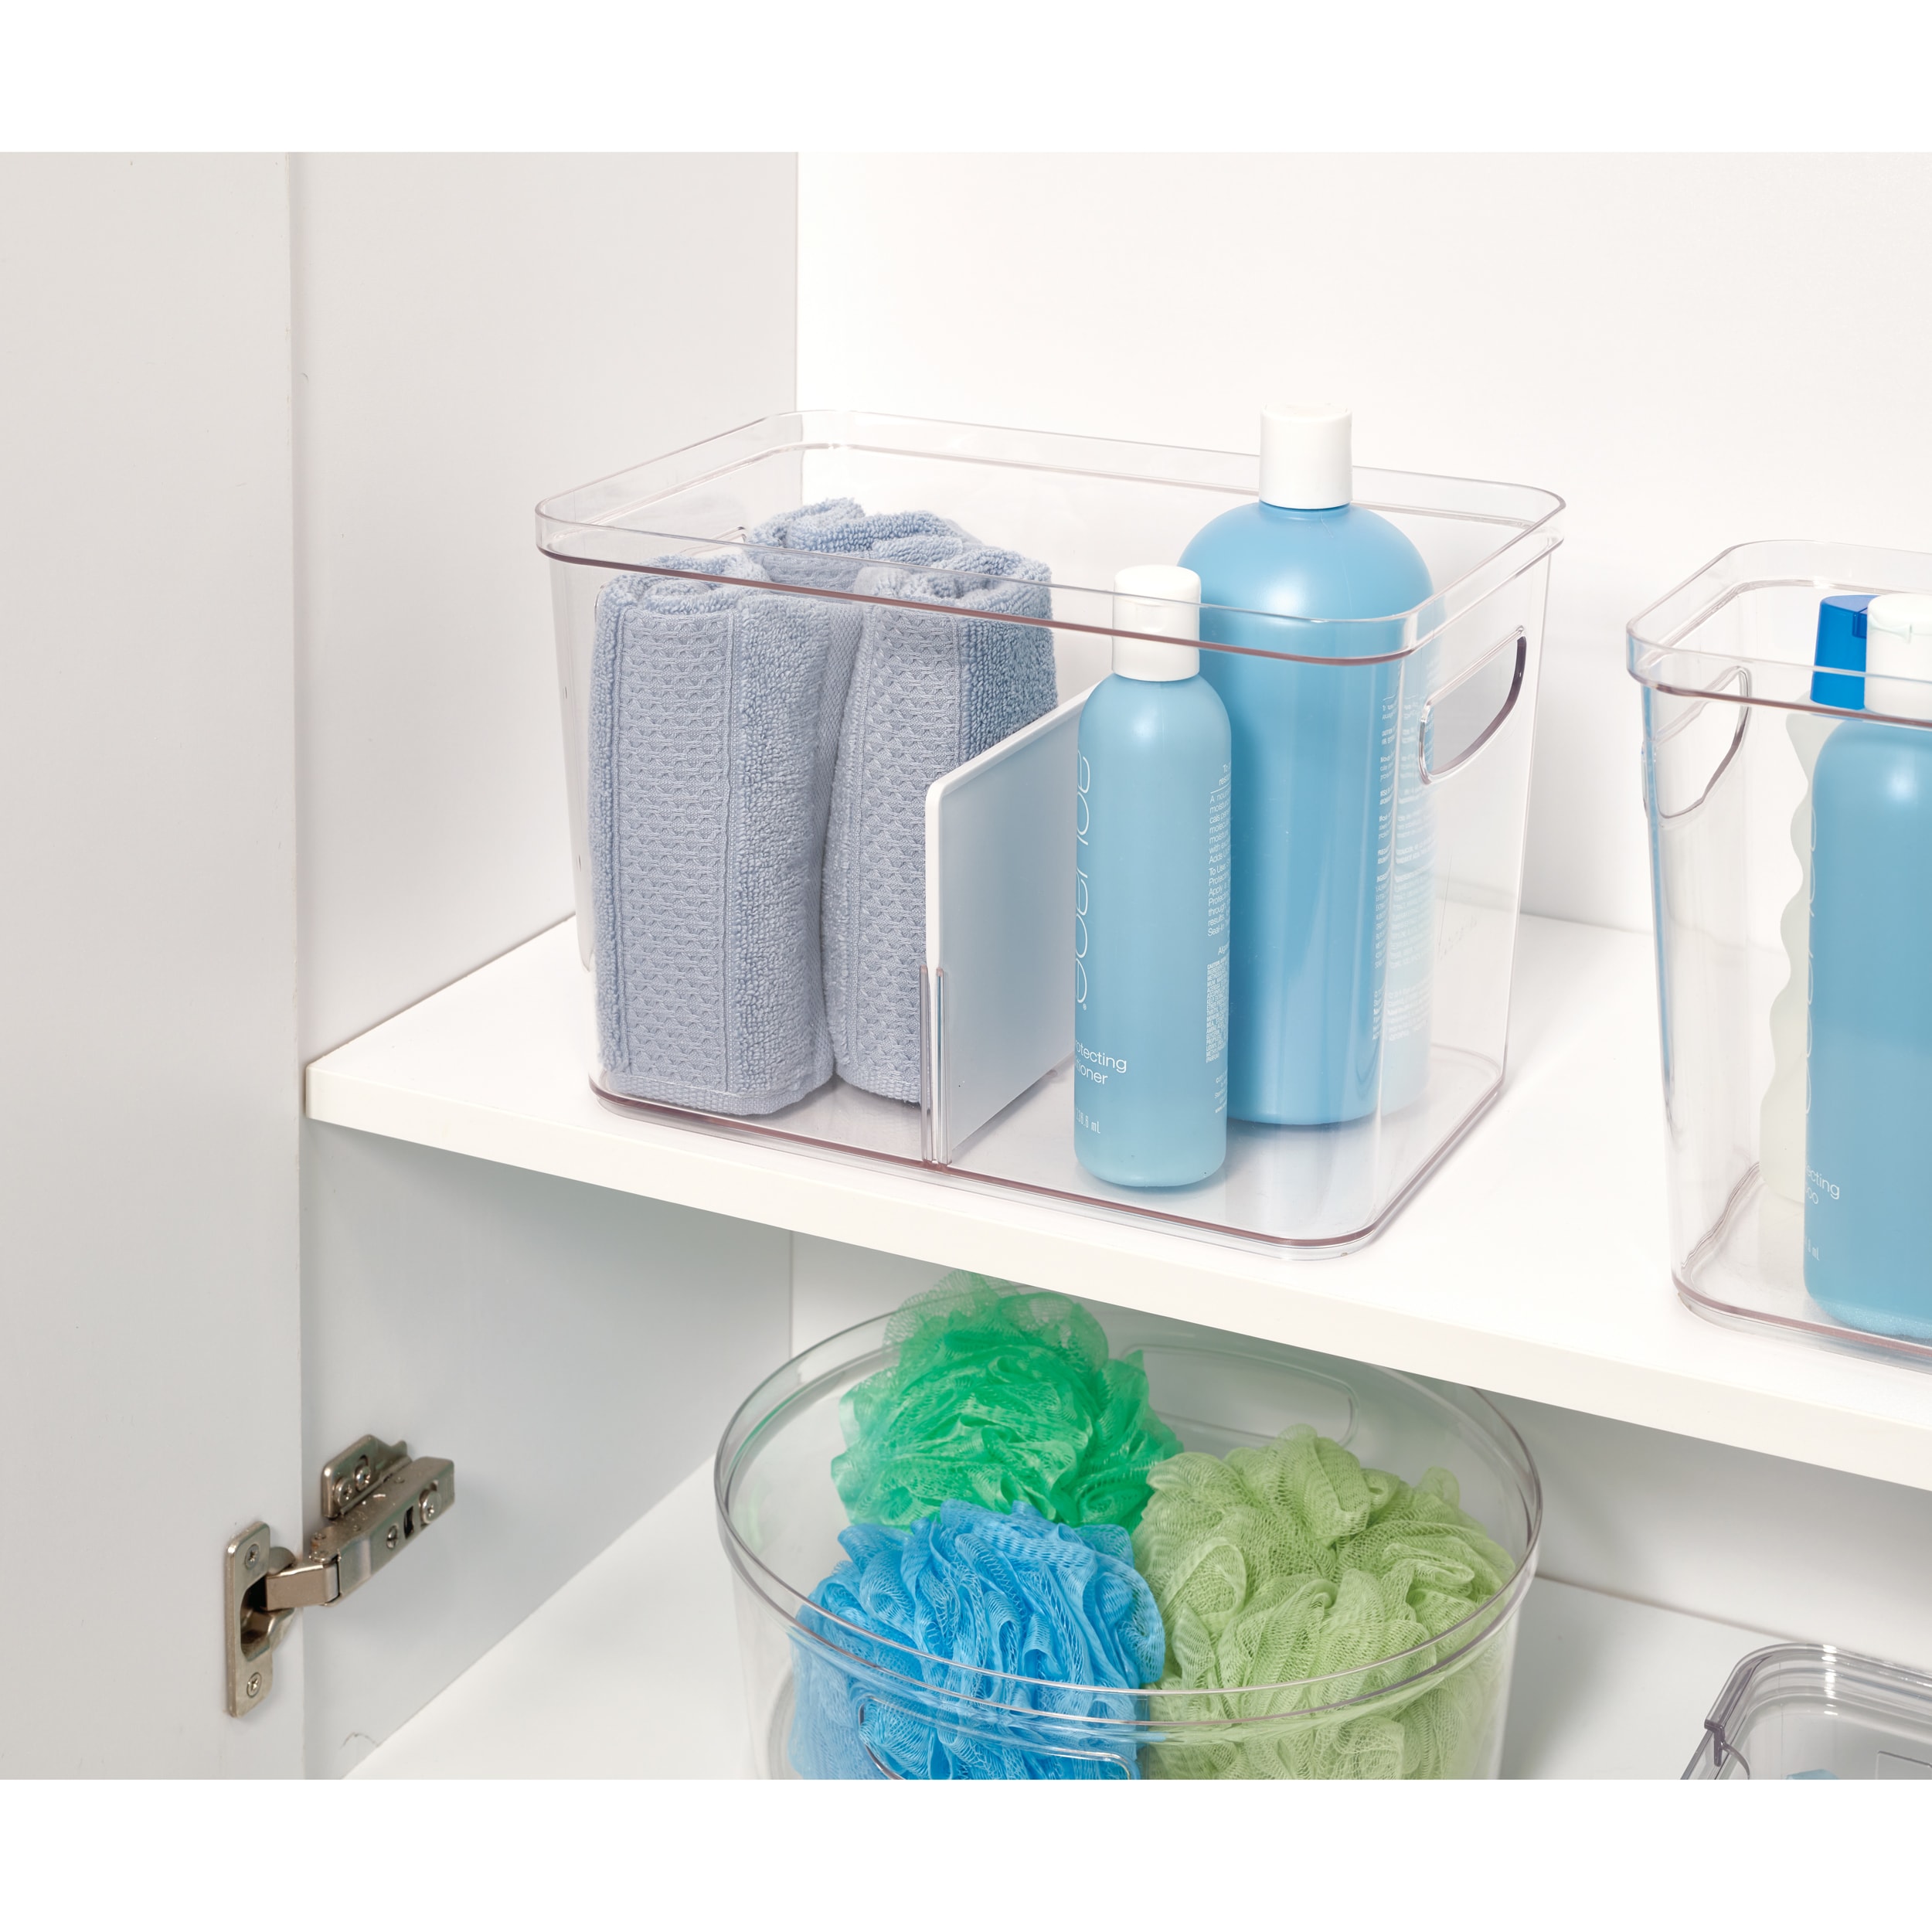 How To Label Clear Storage Bins – 12 Good-Looking Examples!